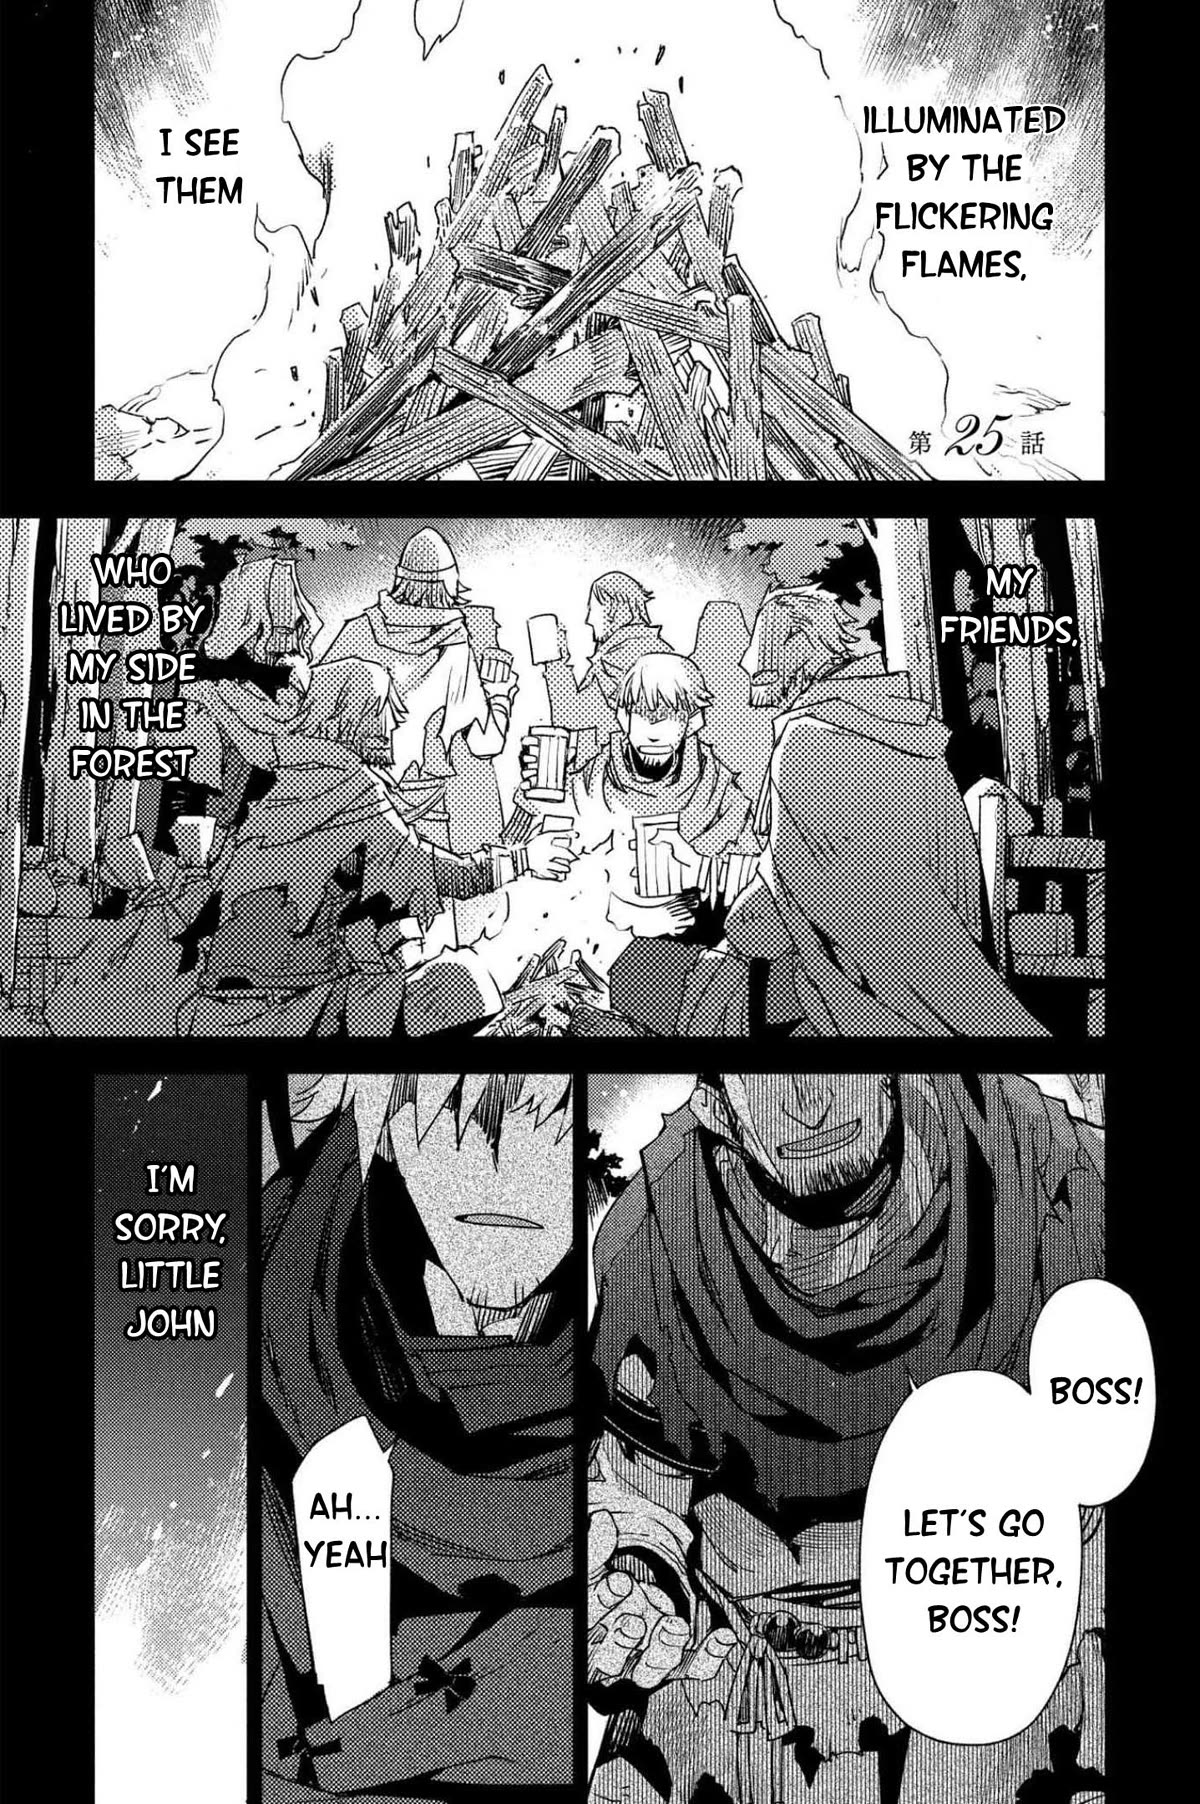 Fate/grand Order: Epic Of Remnant - Subspecies Singularity Iv: Taboo Advent Salem: Salem Of Heresy Chapter 25: The Second Knot - 6 - Picture 1